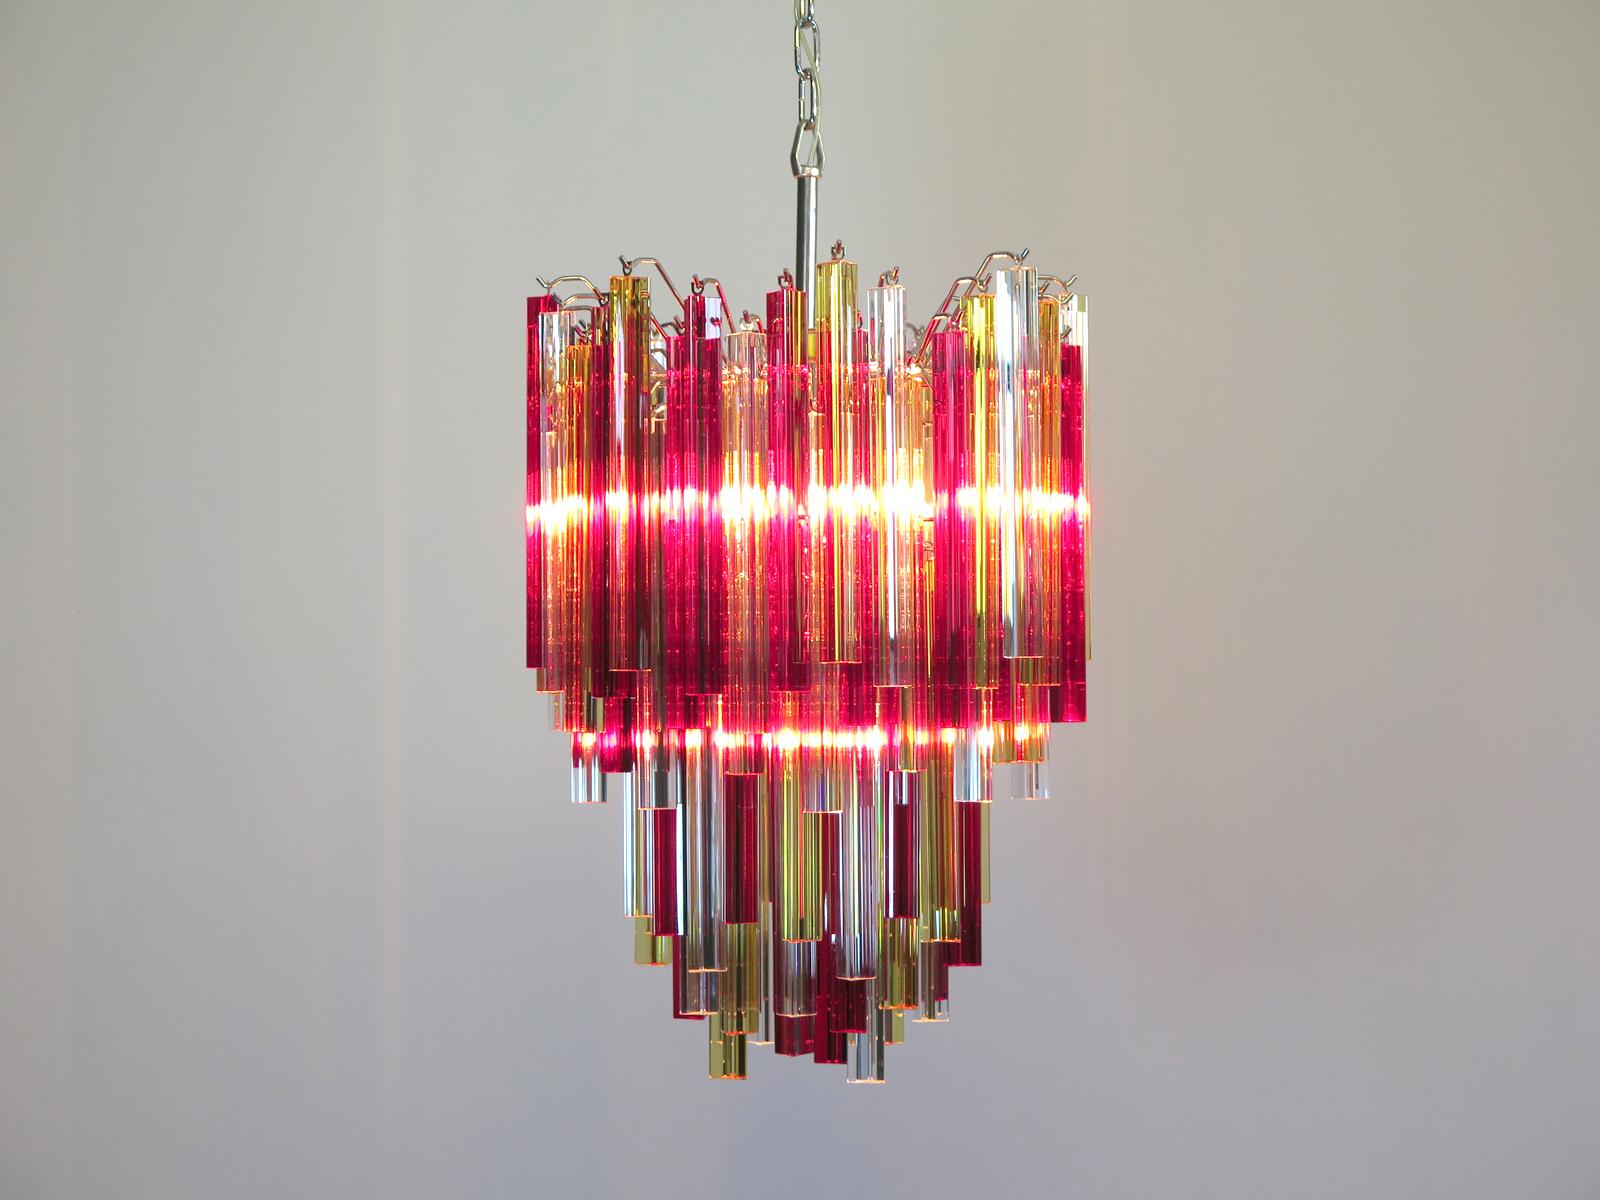 Murano Chandelier Triedri, 92 Prism, Trasparent Yellow and Red Glasses 2